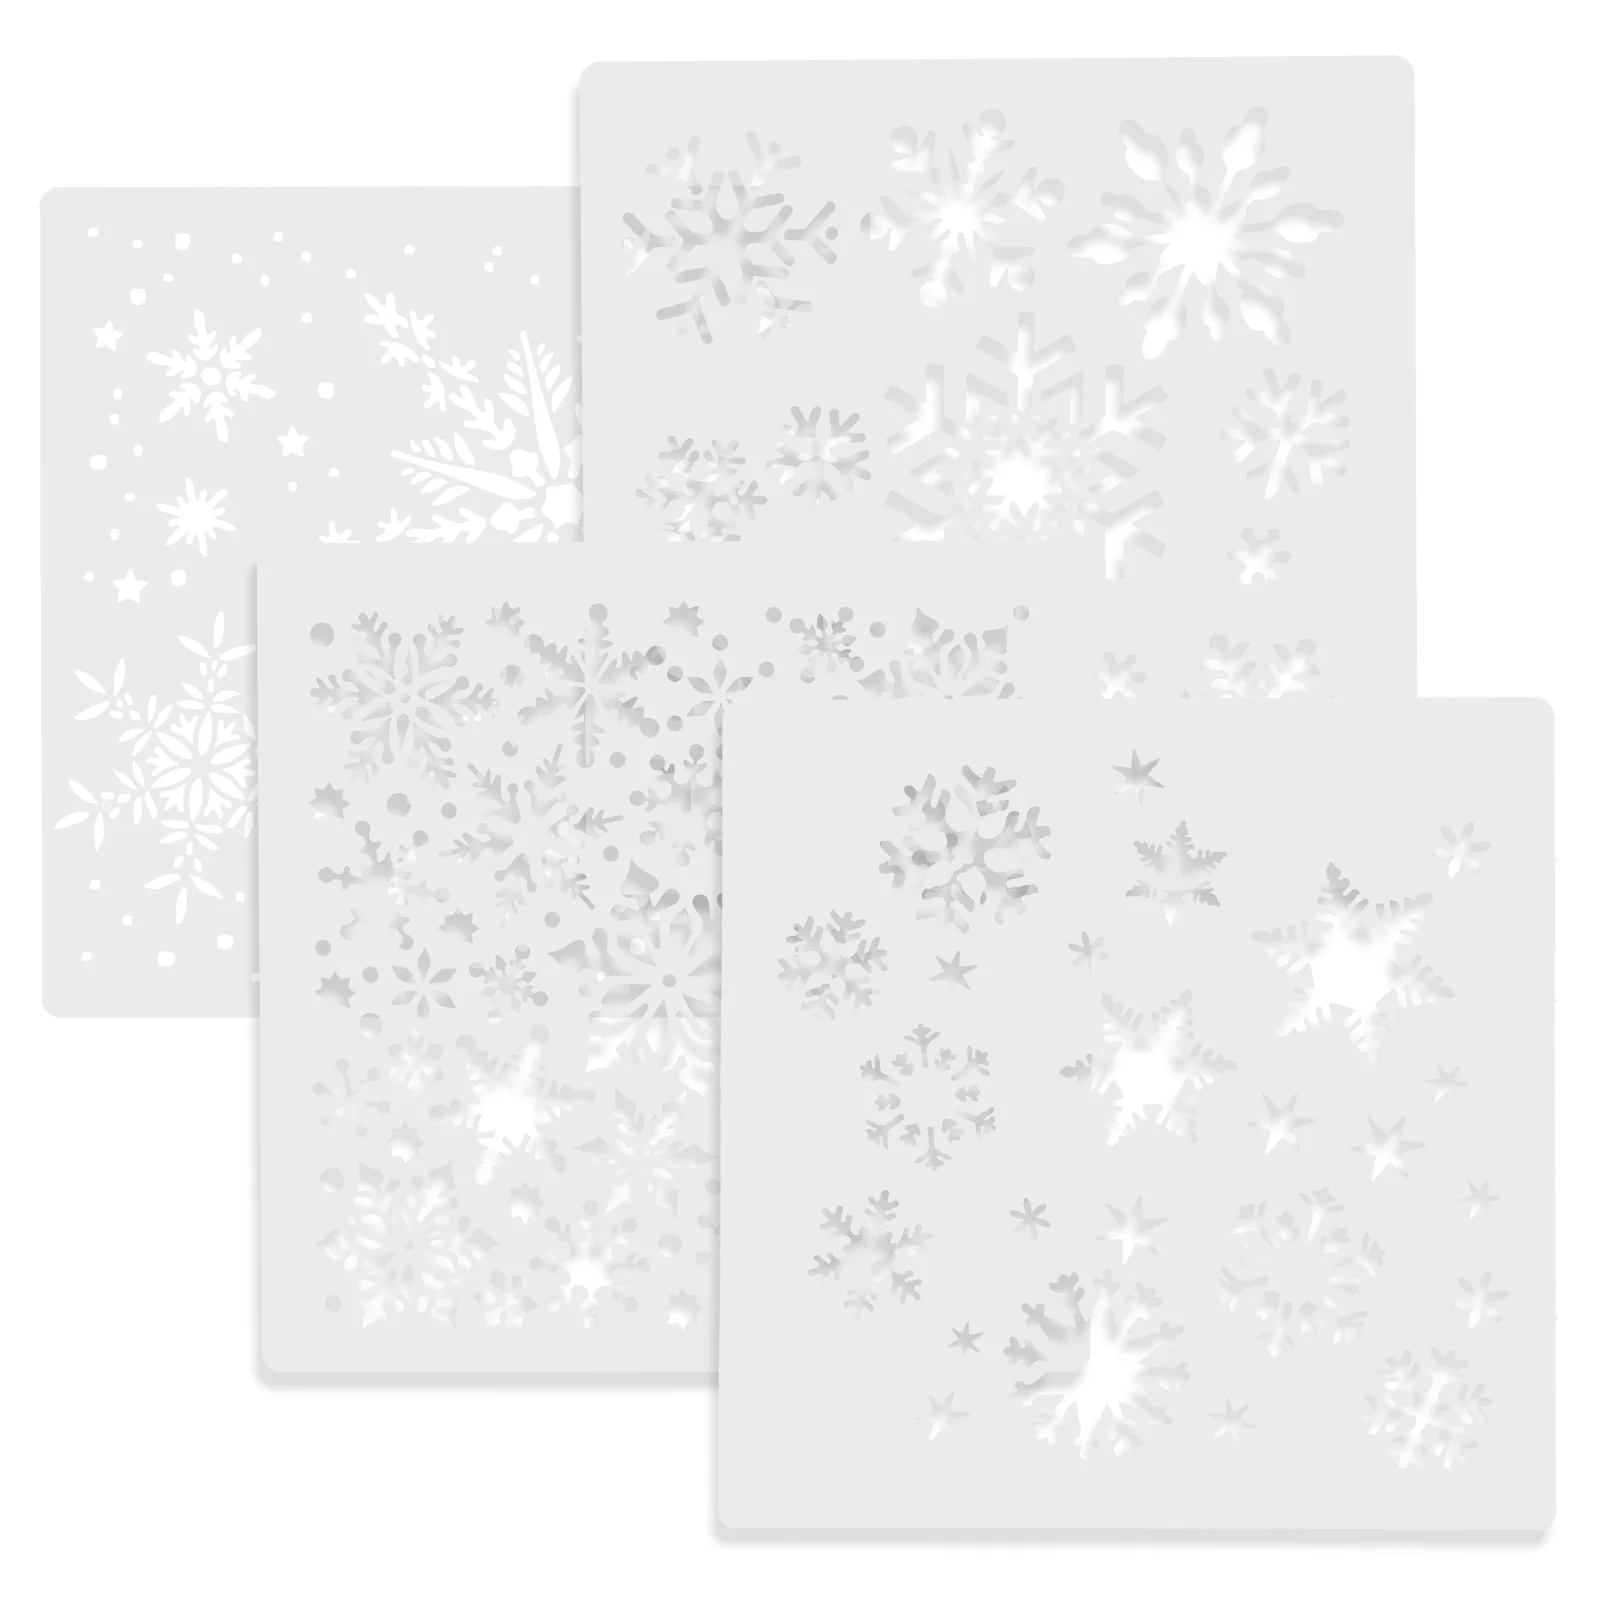 4 Pcs Cookie Molds Painting Template Templates Coffee Snowflake Plastic White DIY Child